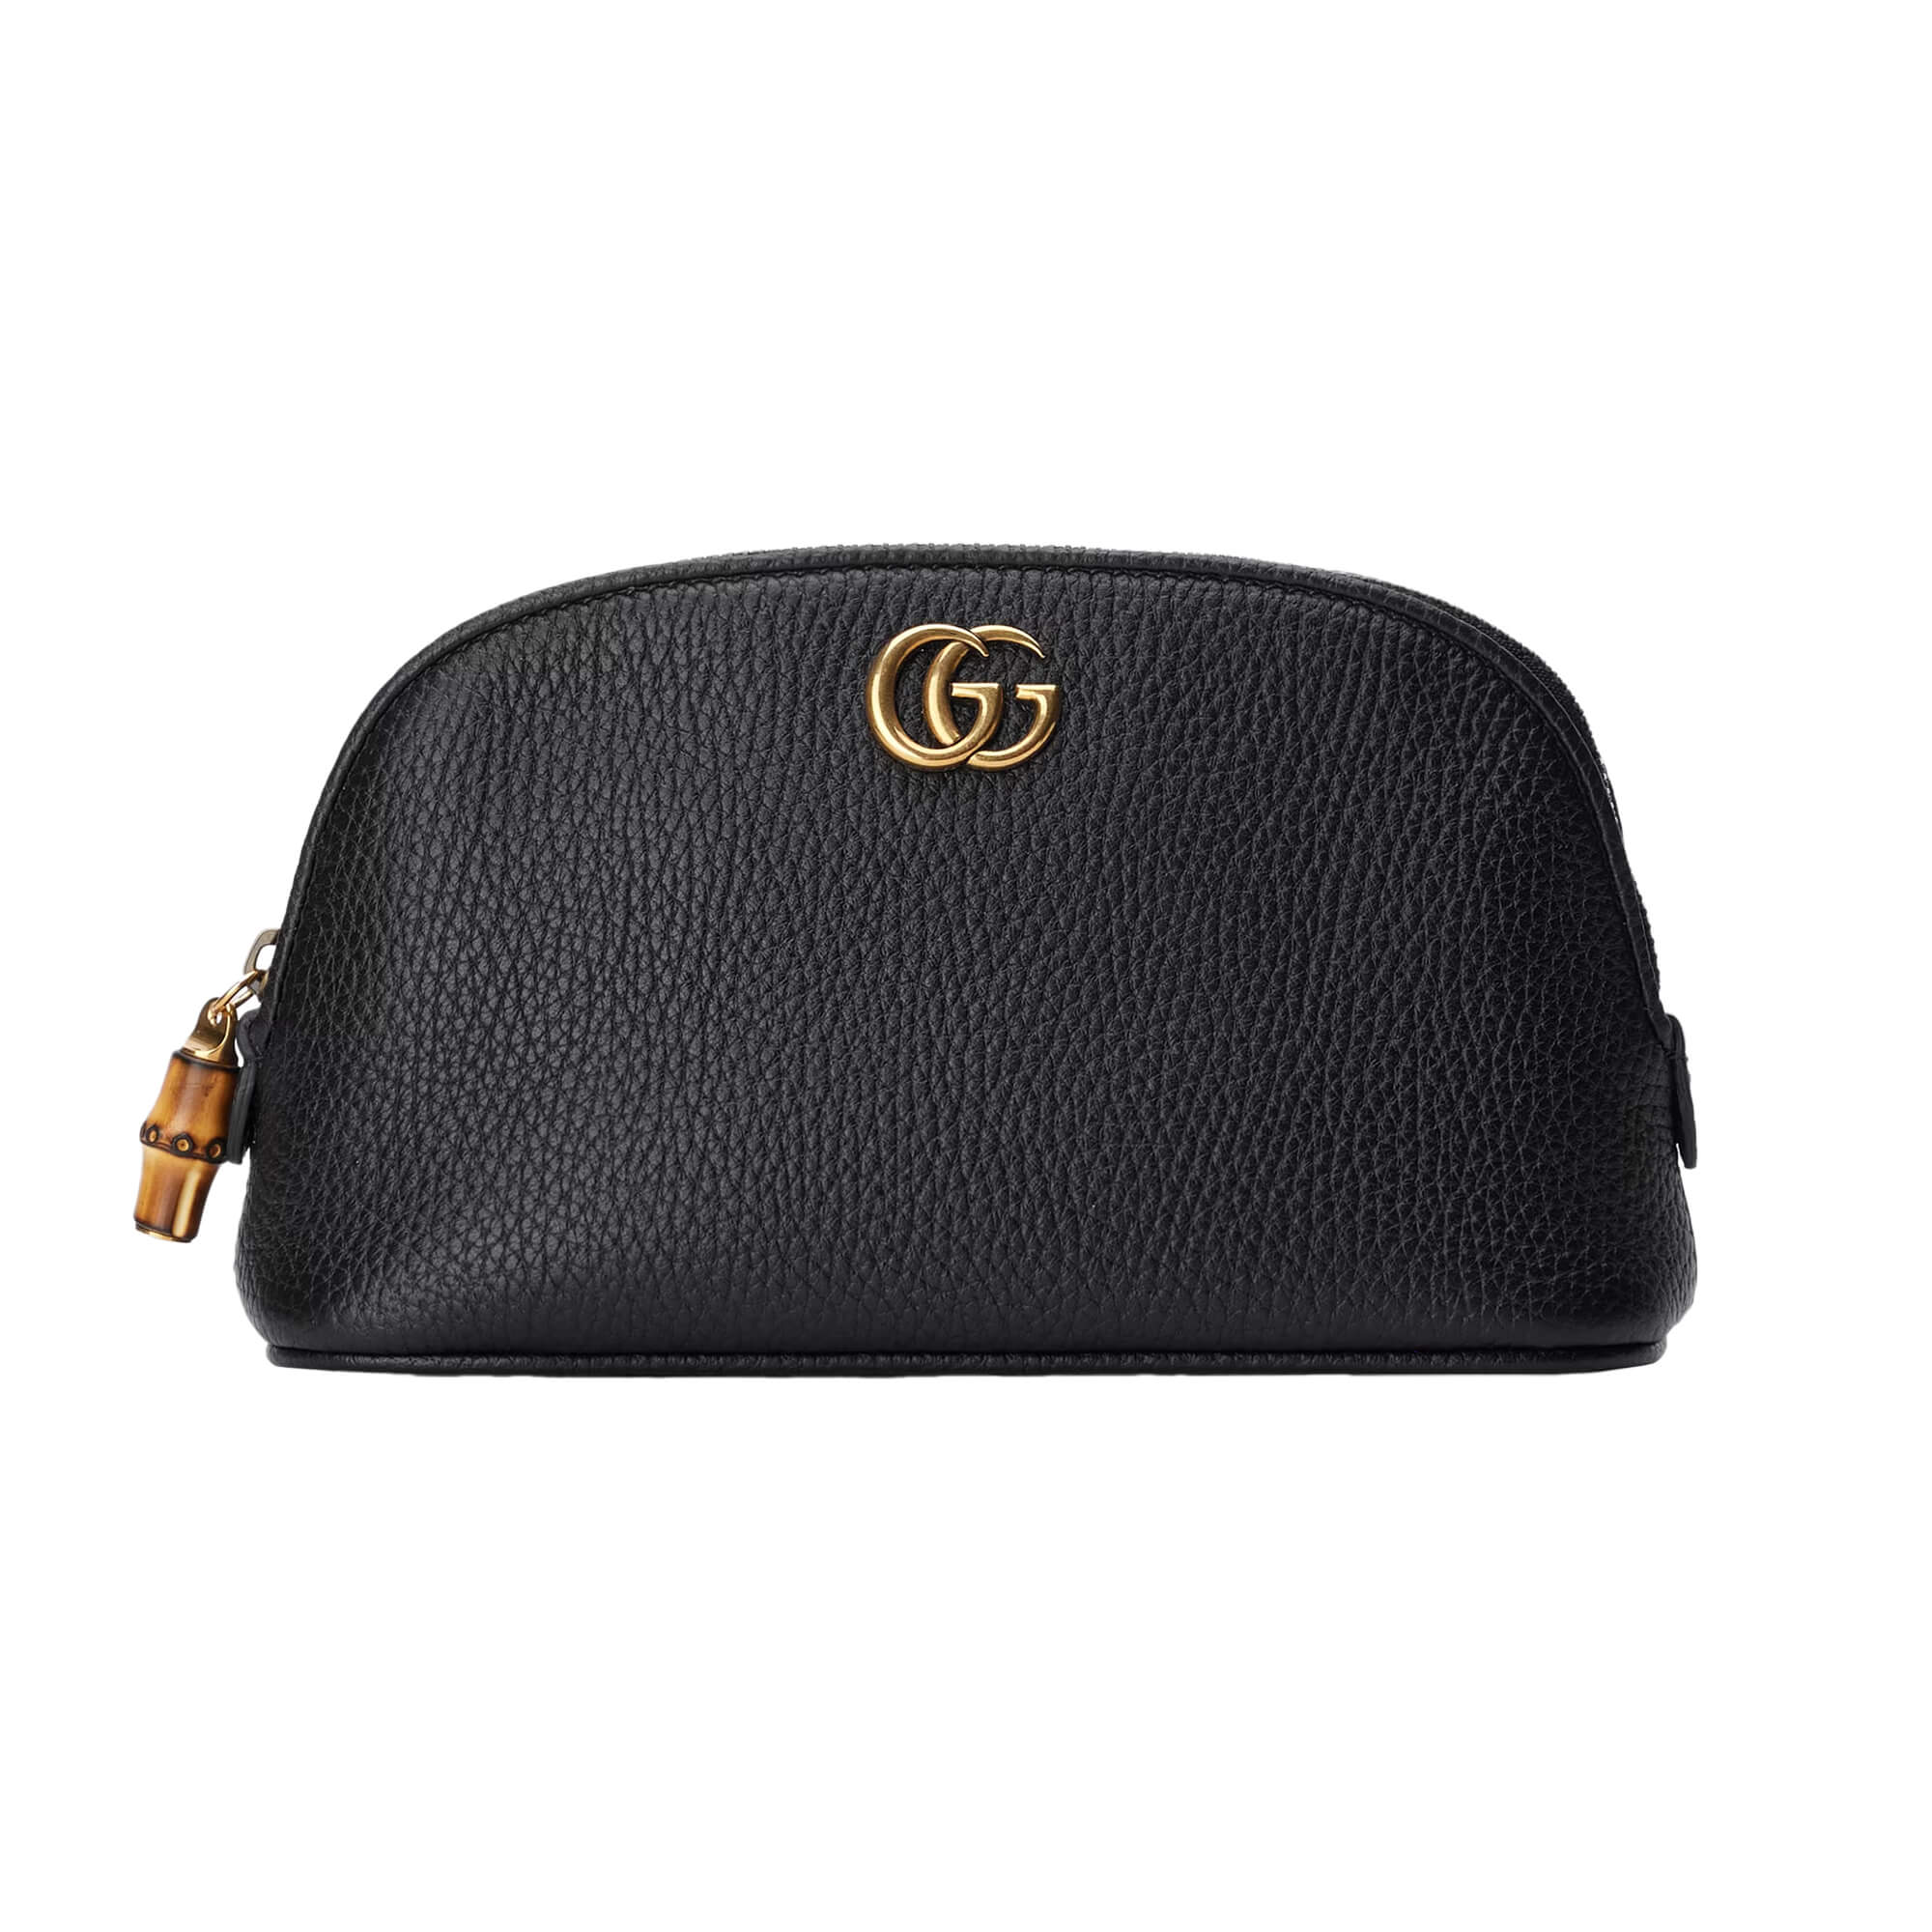 gucci-double-g-beauty-case-with-bamboo-p-772783AABXM1000-a